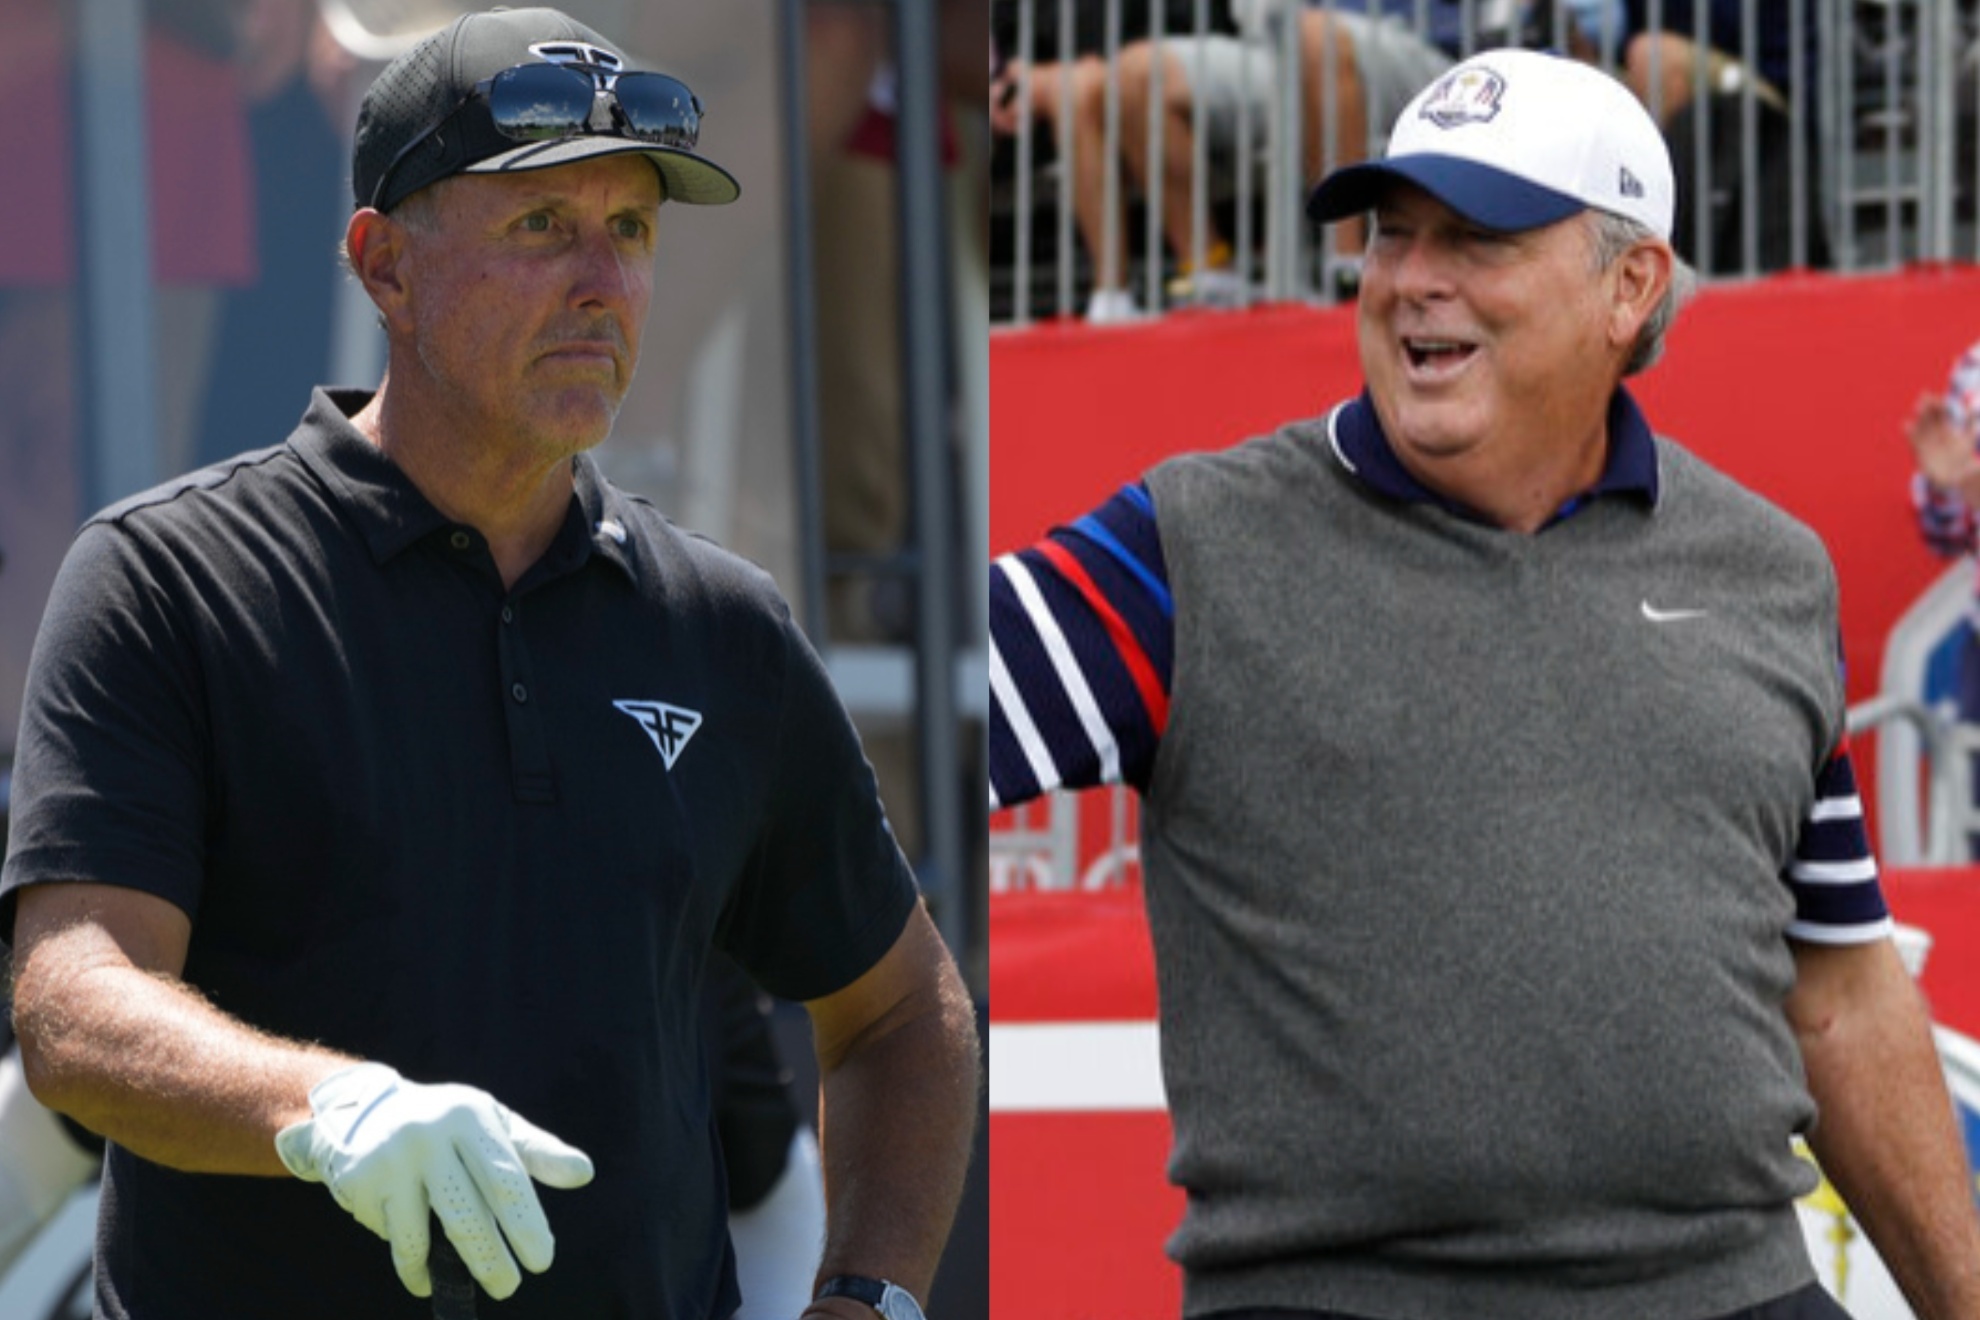 Lanny Wadkins criticized Phil Mickelson again on his gambling issues